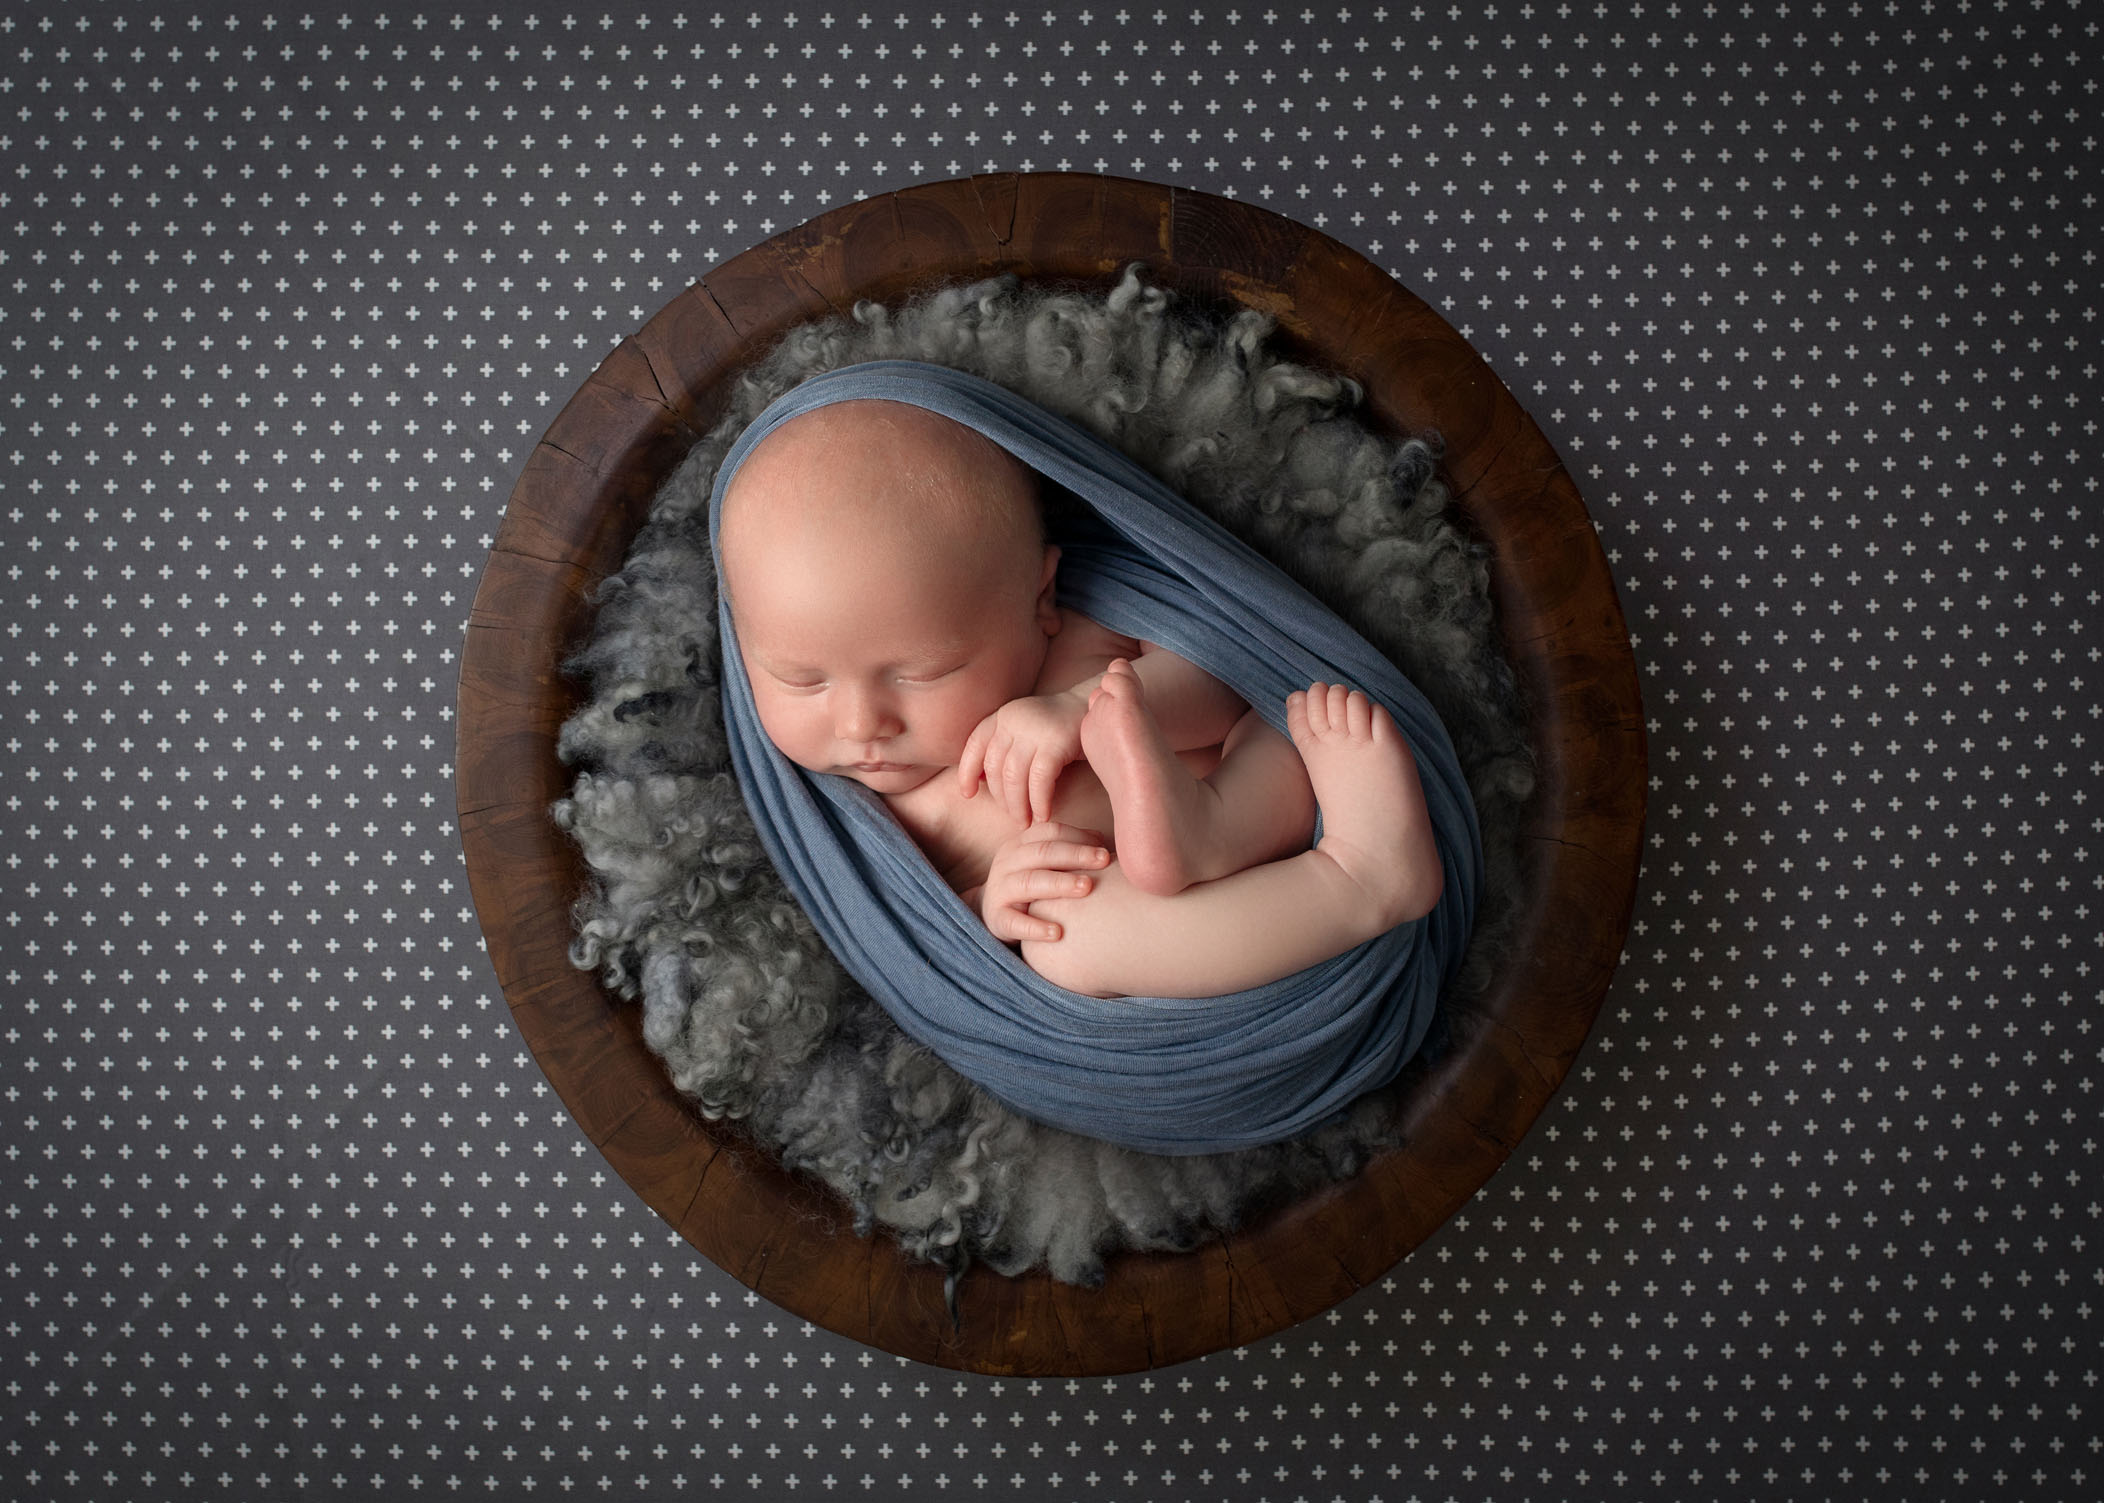 sleeping newborn wrapped in egg wrap inside wooden bowl filled with soft grey fluff